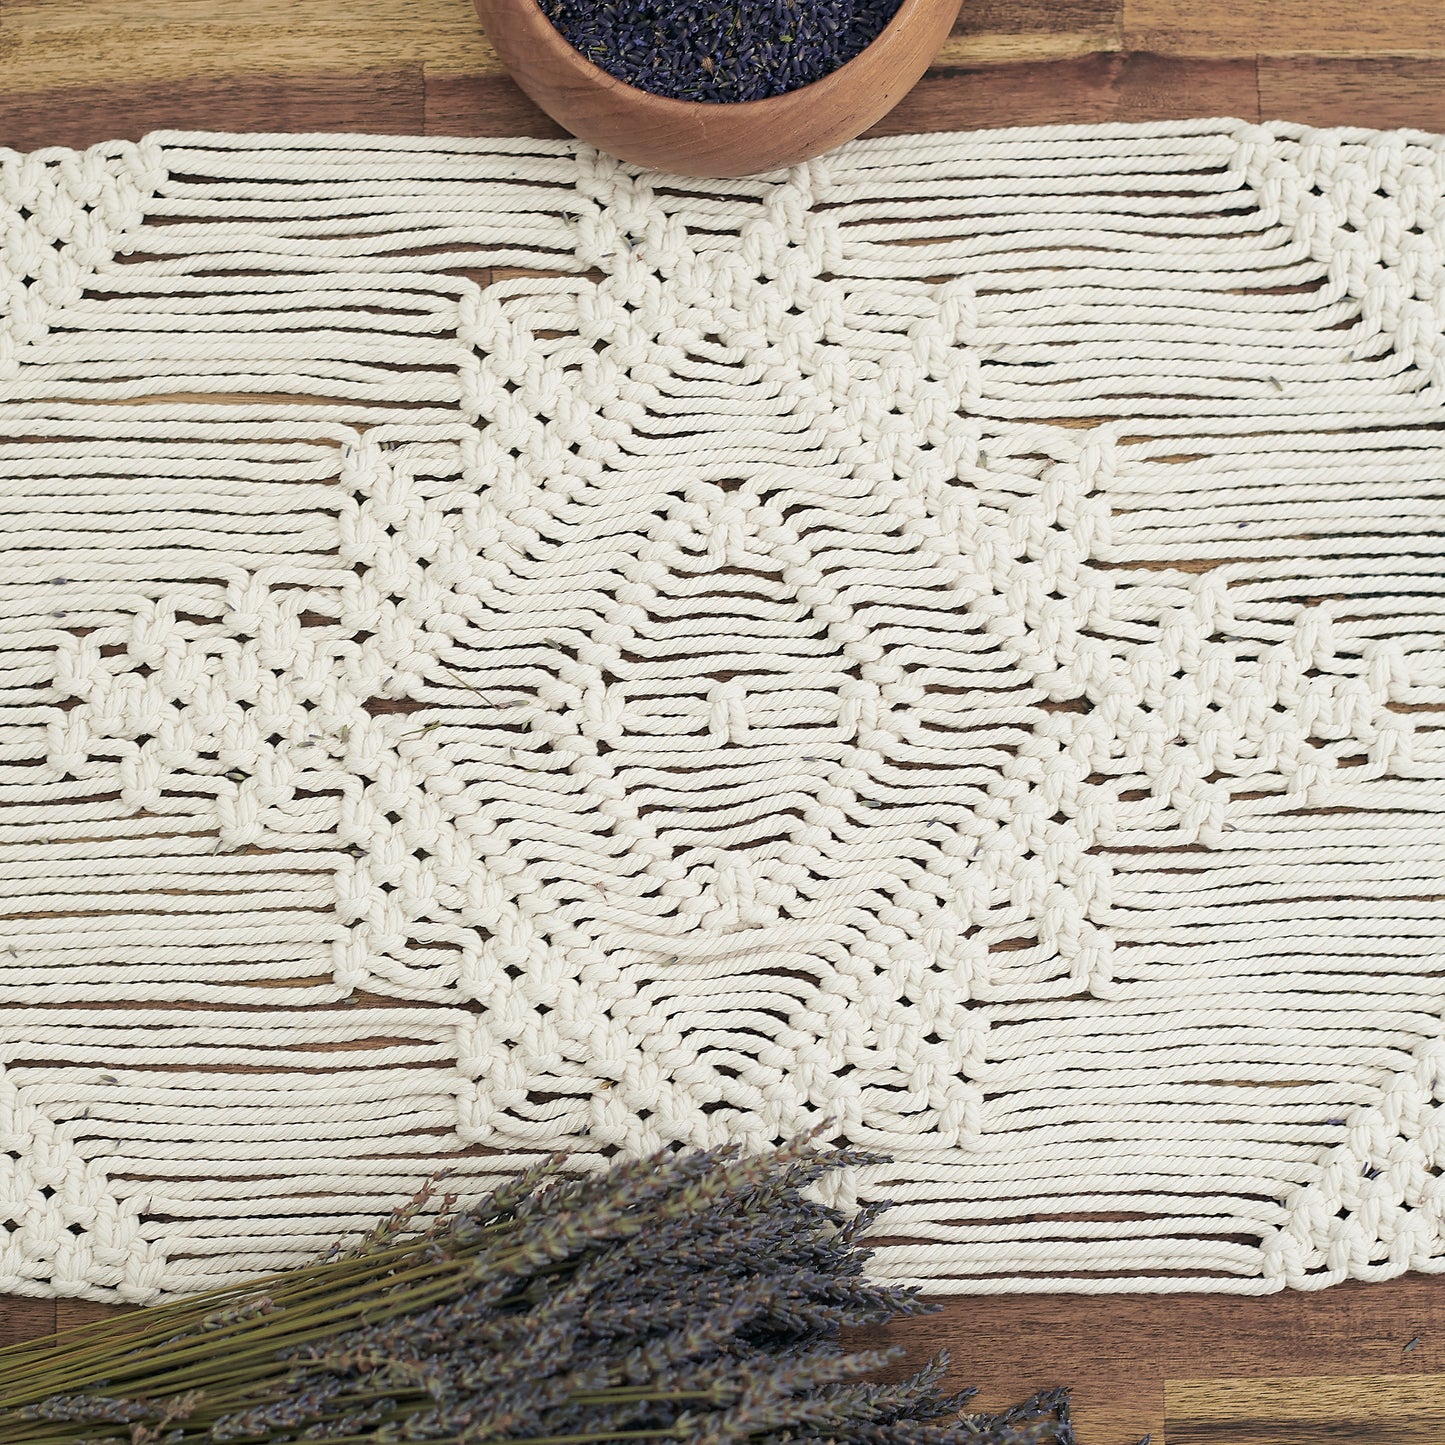 Natural white macrame table runner on a wooden table styled with rustic dried Lavender and pottery